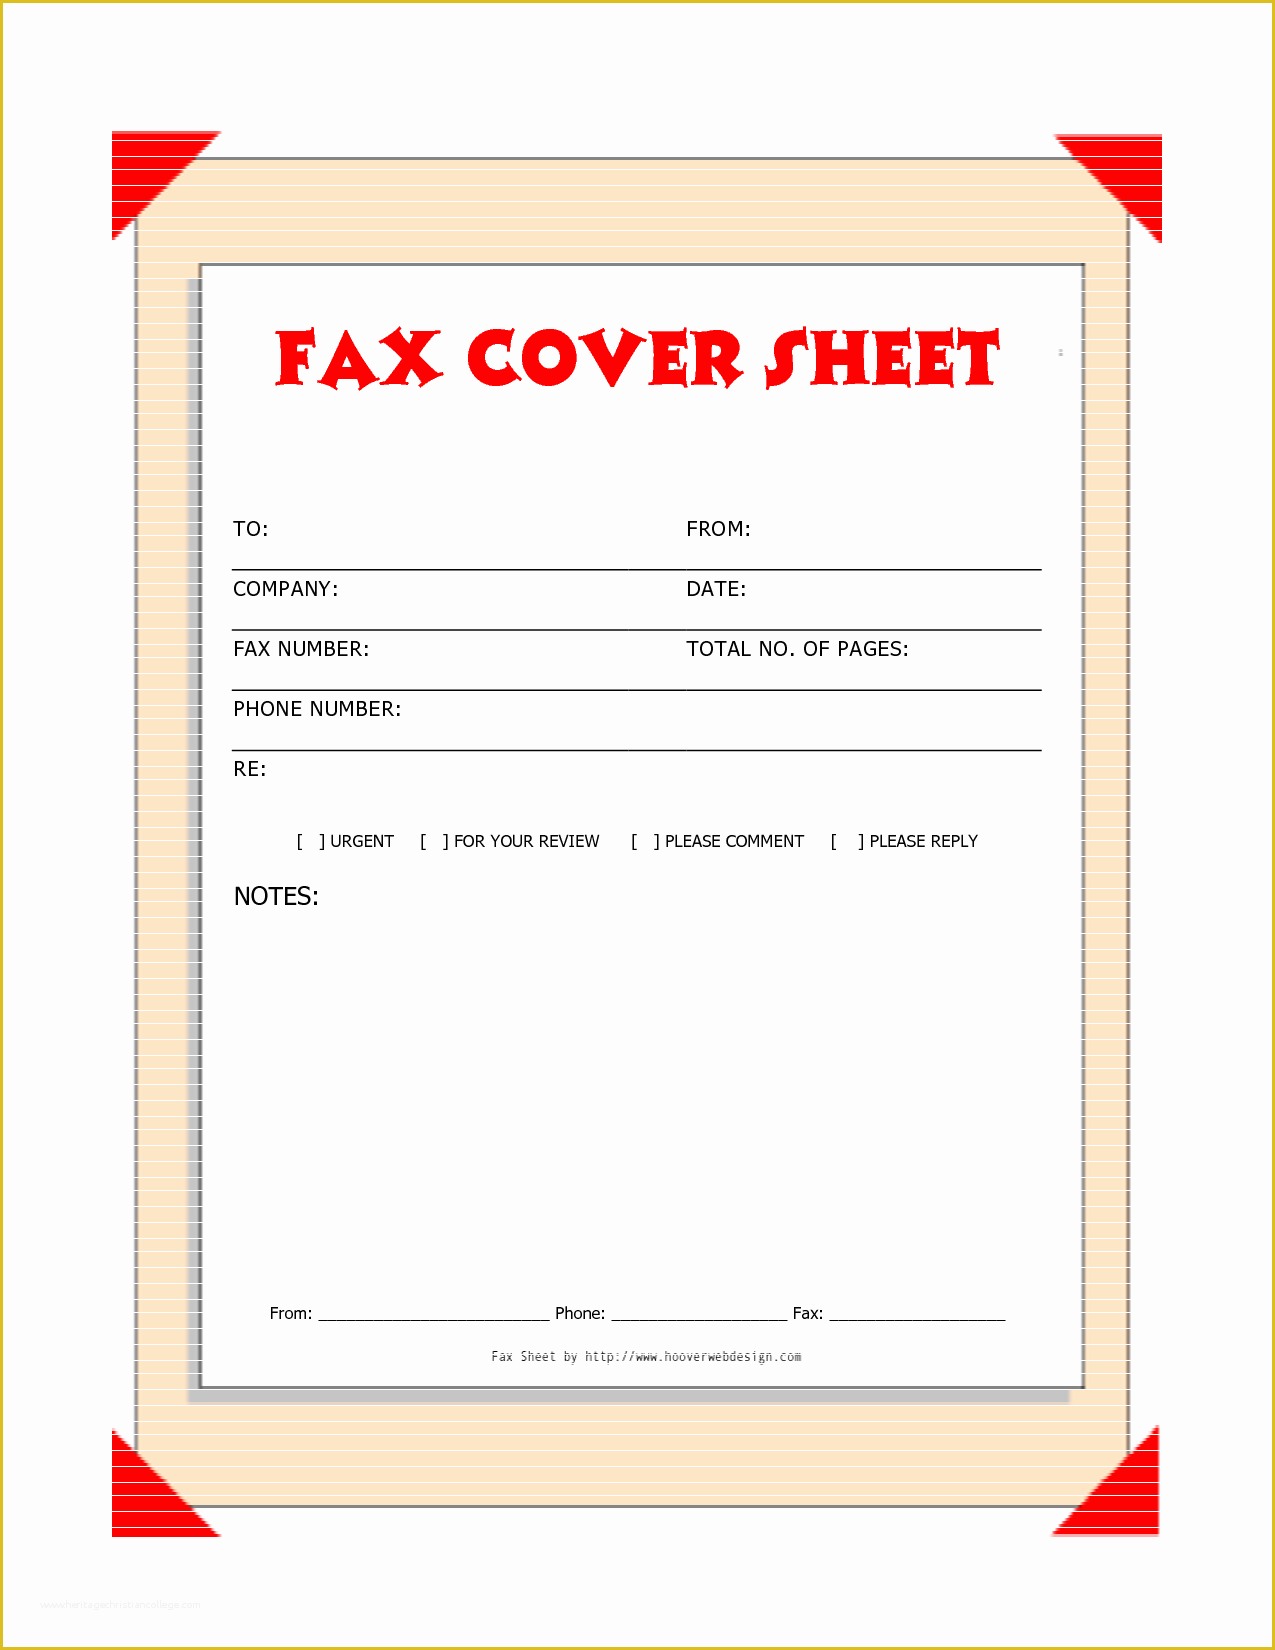 Free Cover Sheet Template for Resume Of Free Downloads Fax Covers Sheets